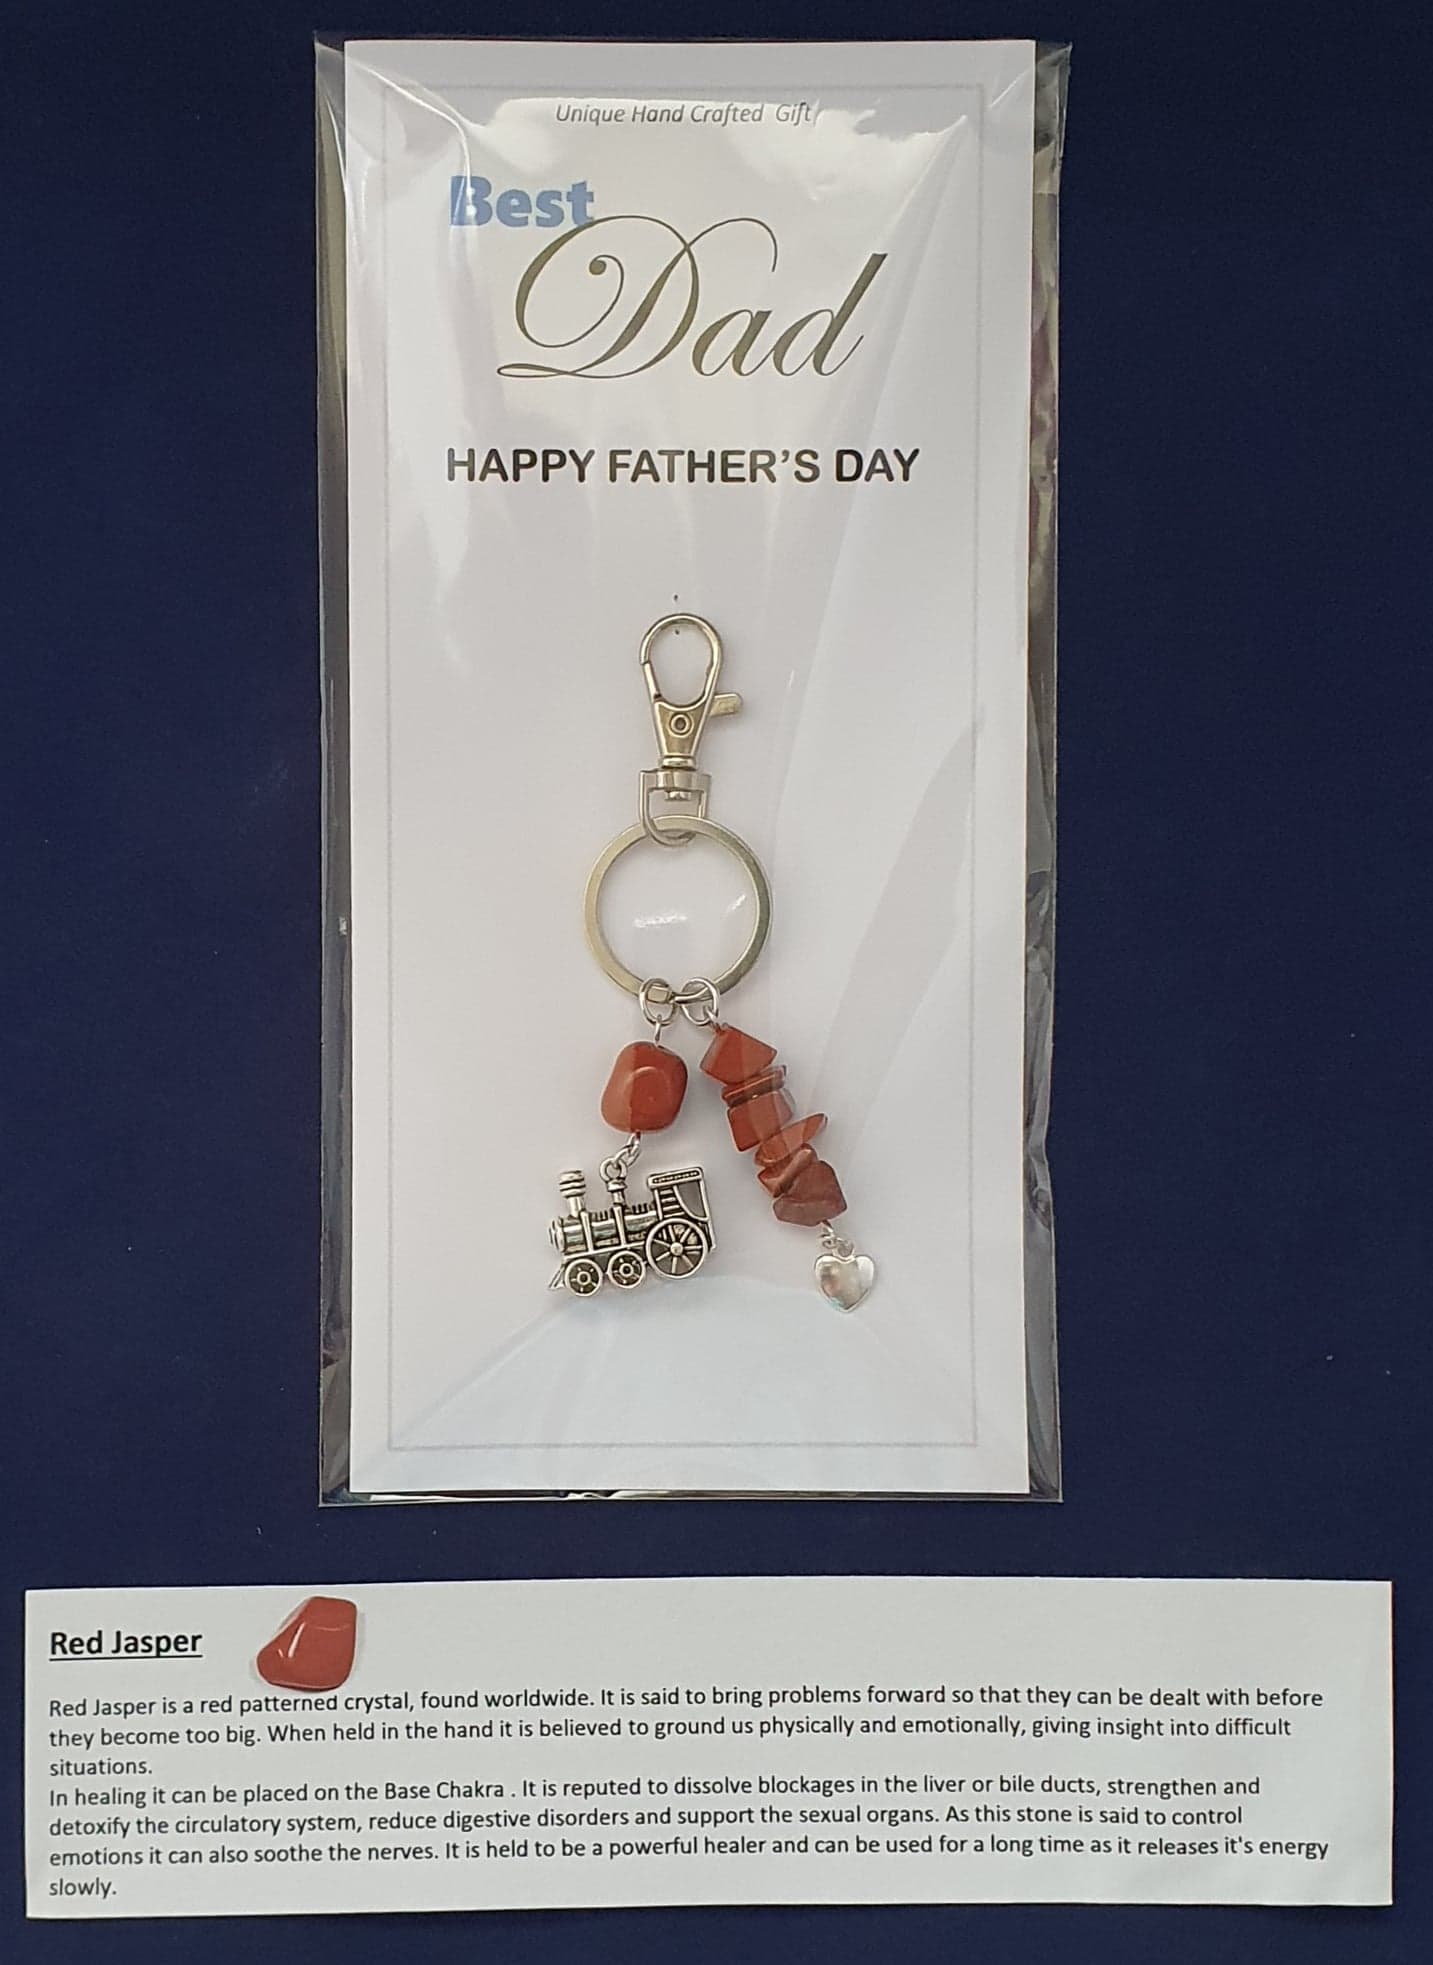 Train Lover Key ring with Red Jasper crystal